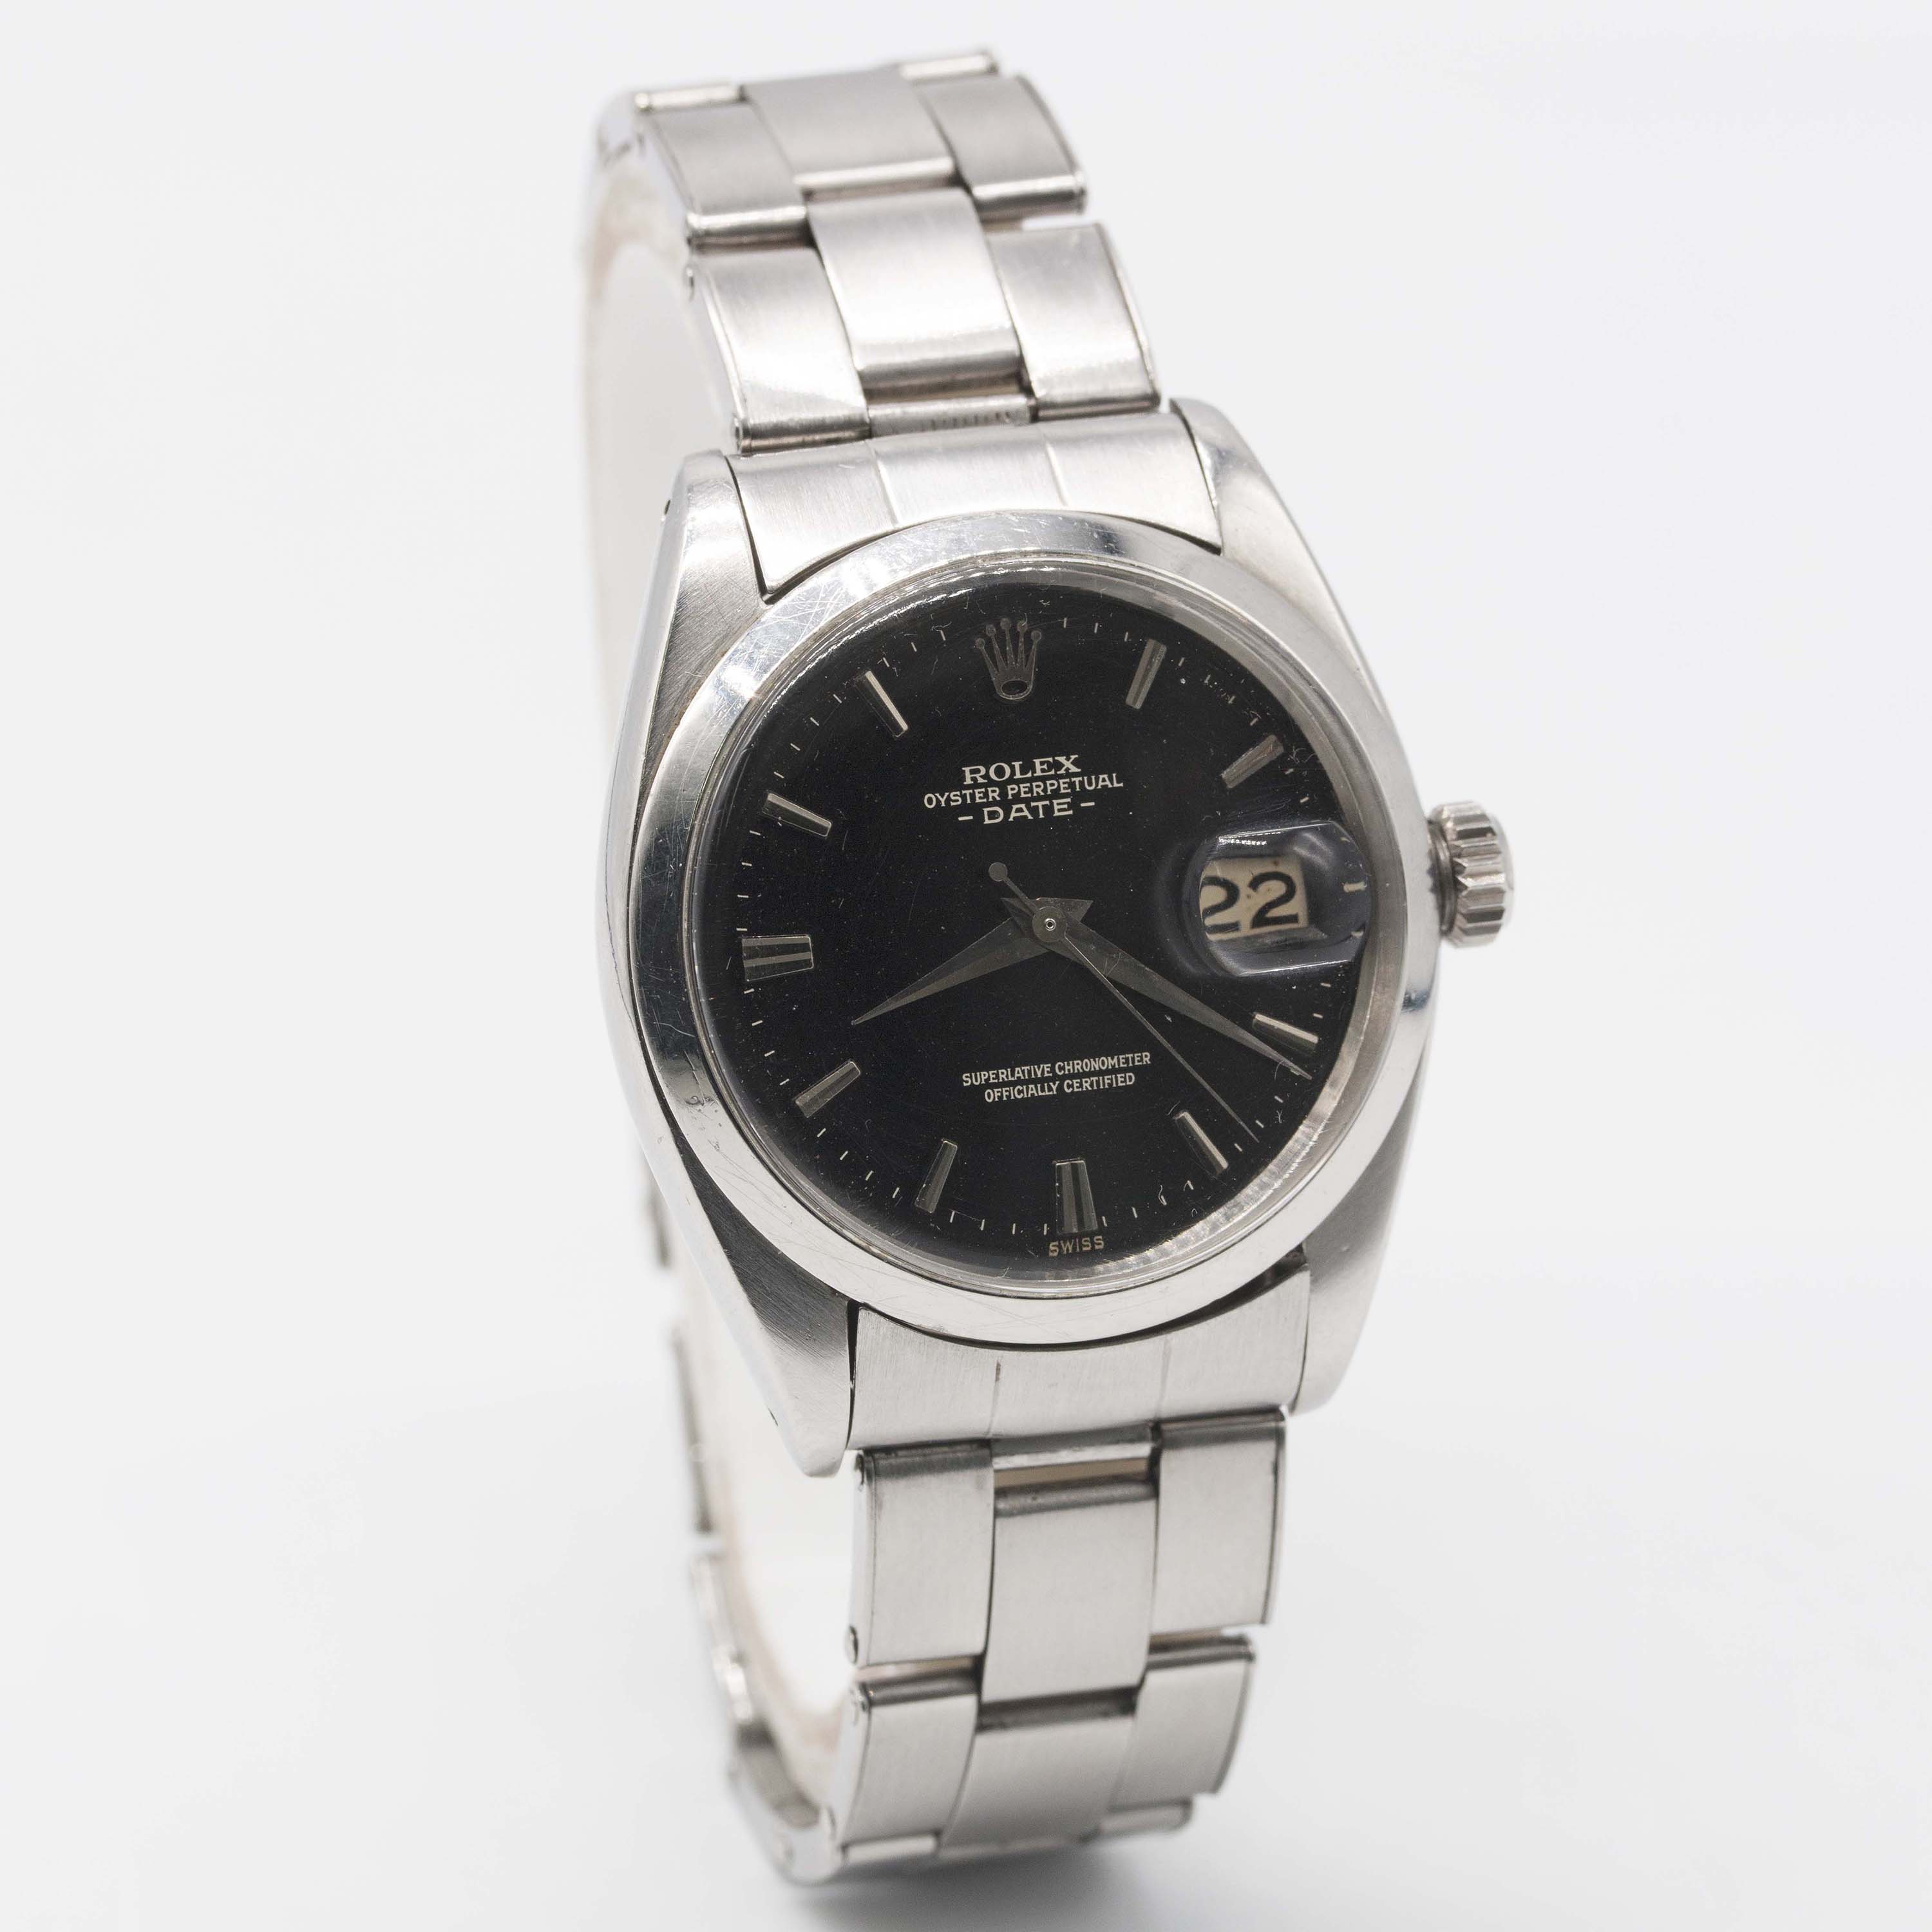 A GENTLEMAN'S STAINLESS STEEL ROLEX OYSTER PERPETUAL DATE BRACELET WATCH CIRCA 1961, REF. 1500 GLOSS - Image 5 of 12